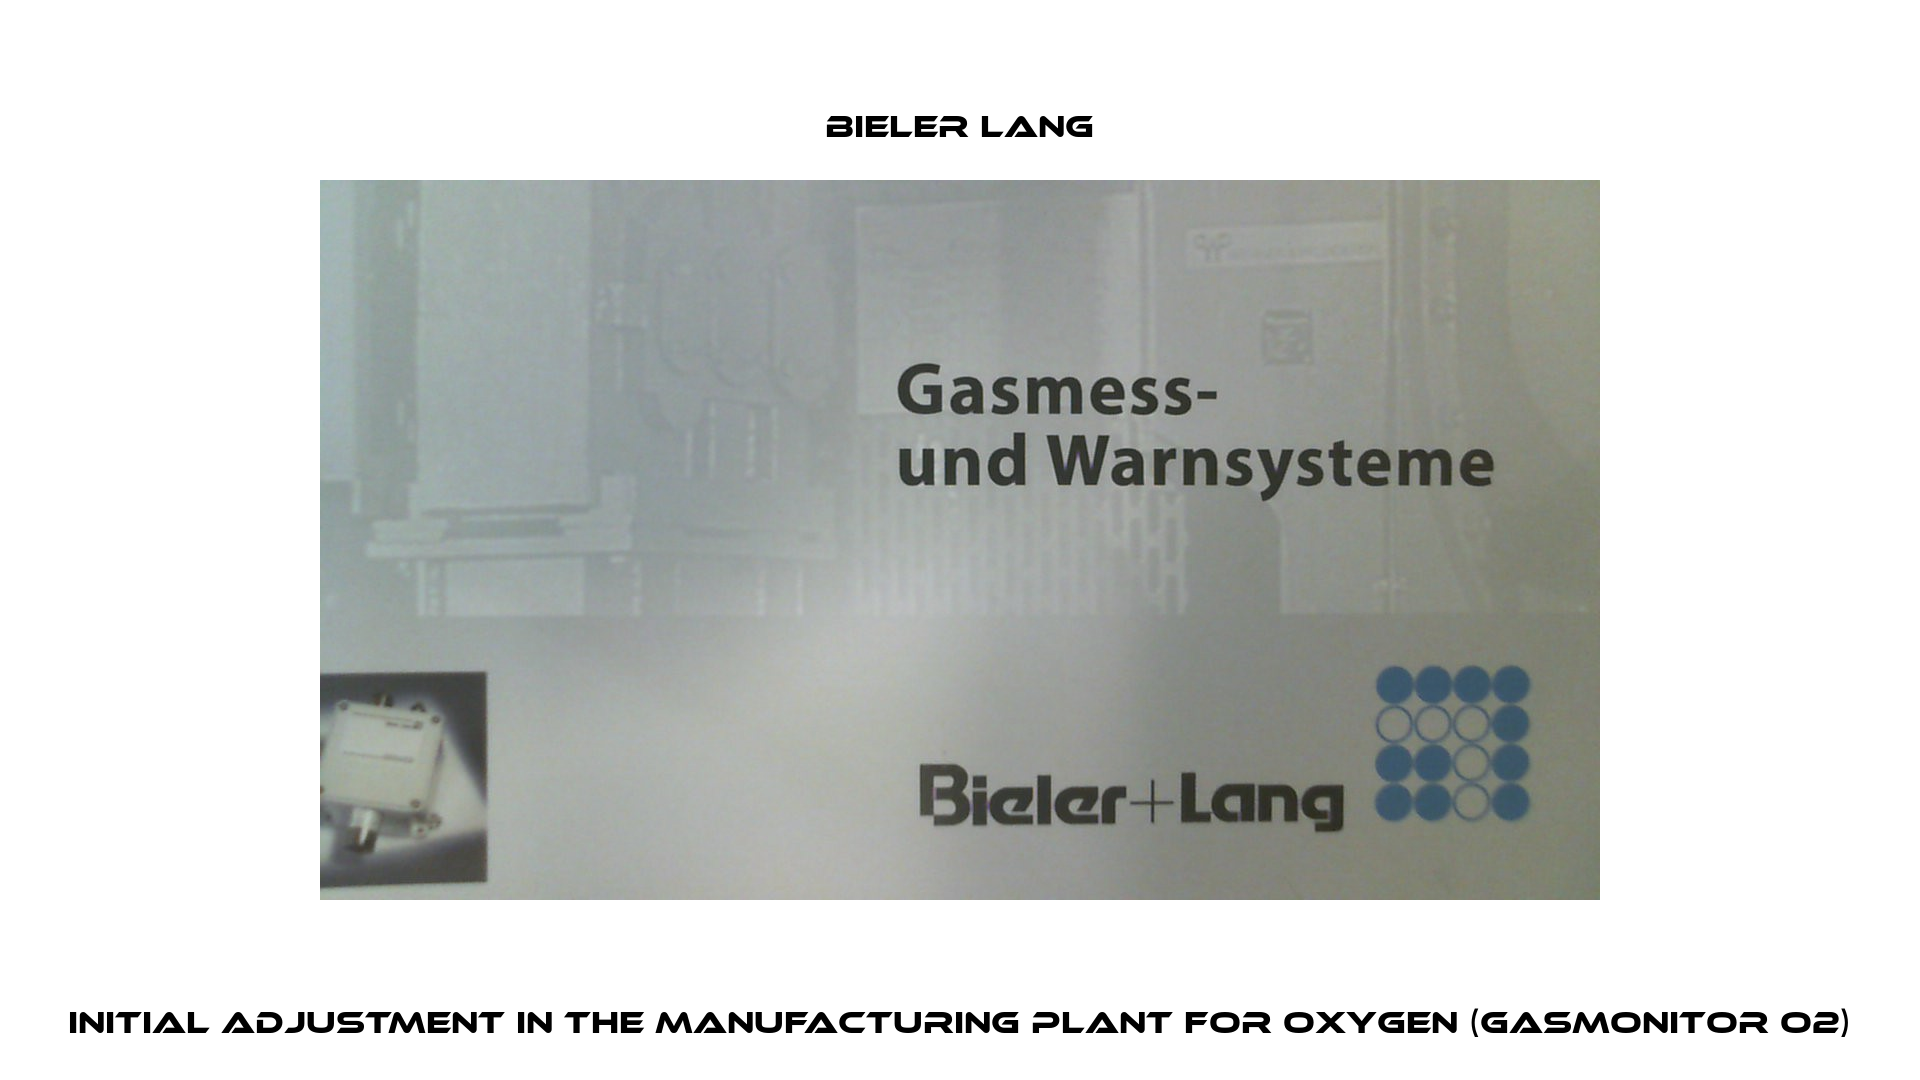 Initial adjustment in the manufacturing plant for oxygen (Gasmonitor O2) Bieler Lang